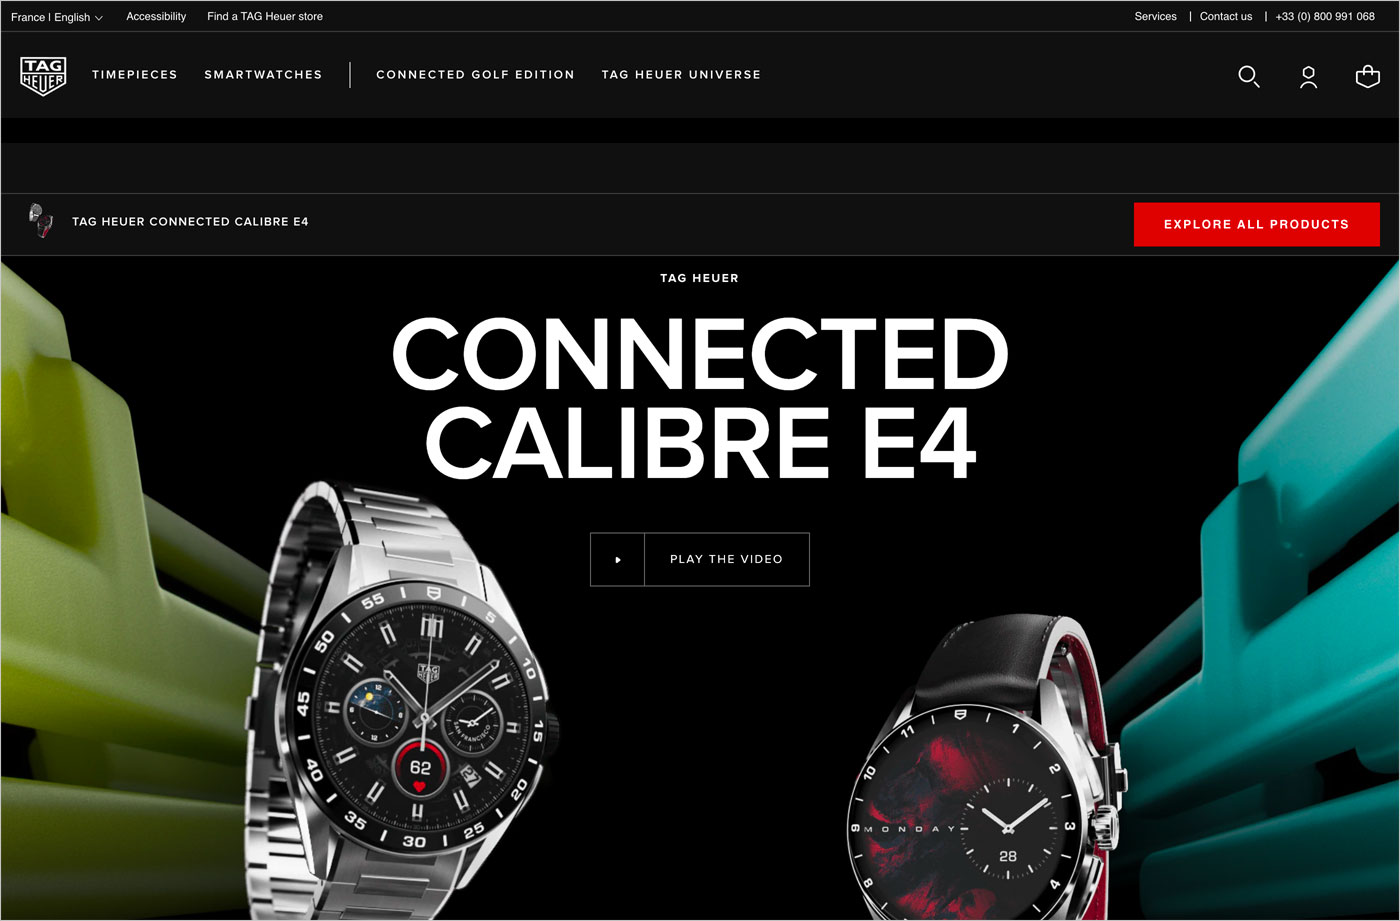 New TAG Heuer® Connected watch | Discover the collectionウェブサイトの画面キャプチャ画像